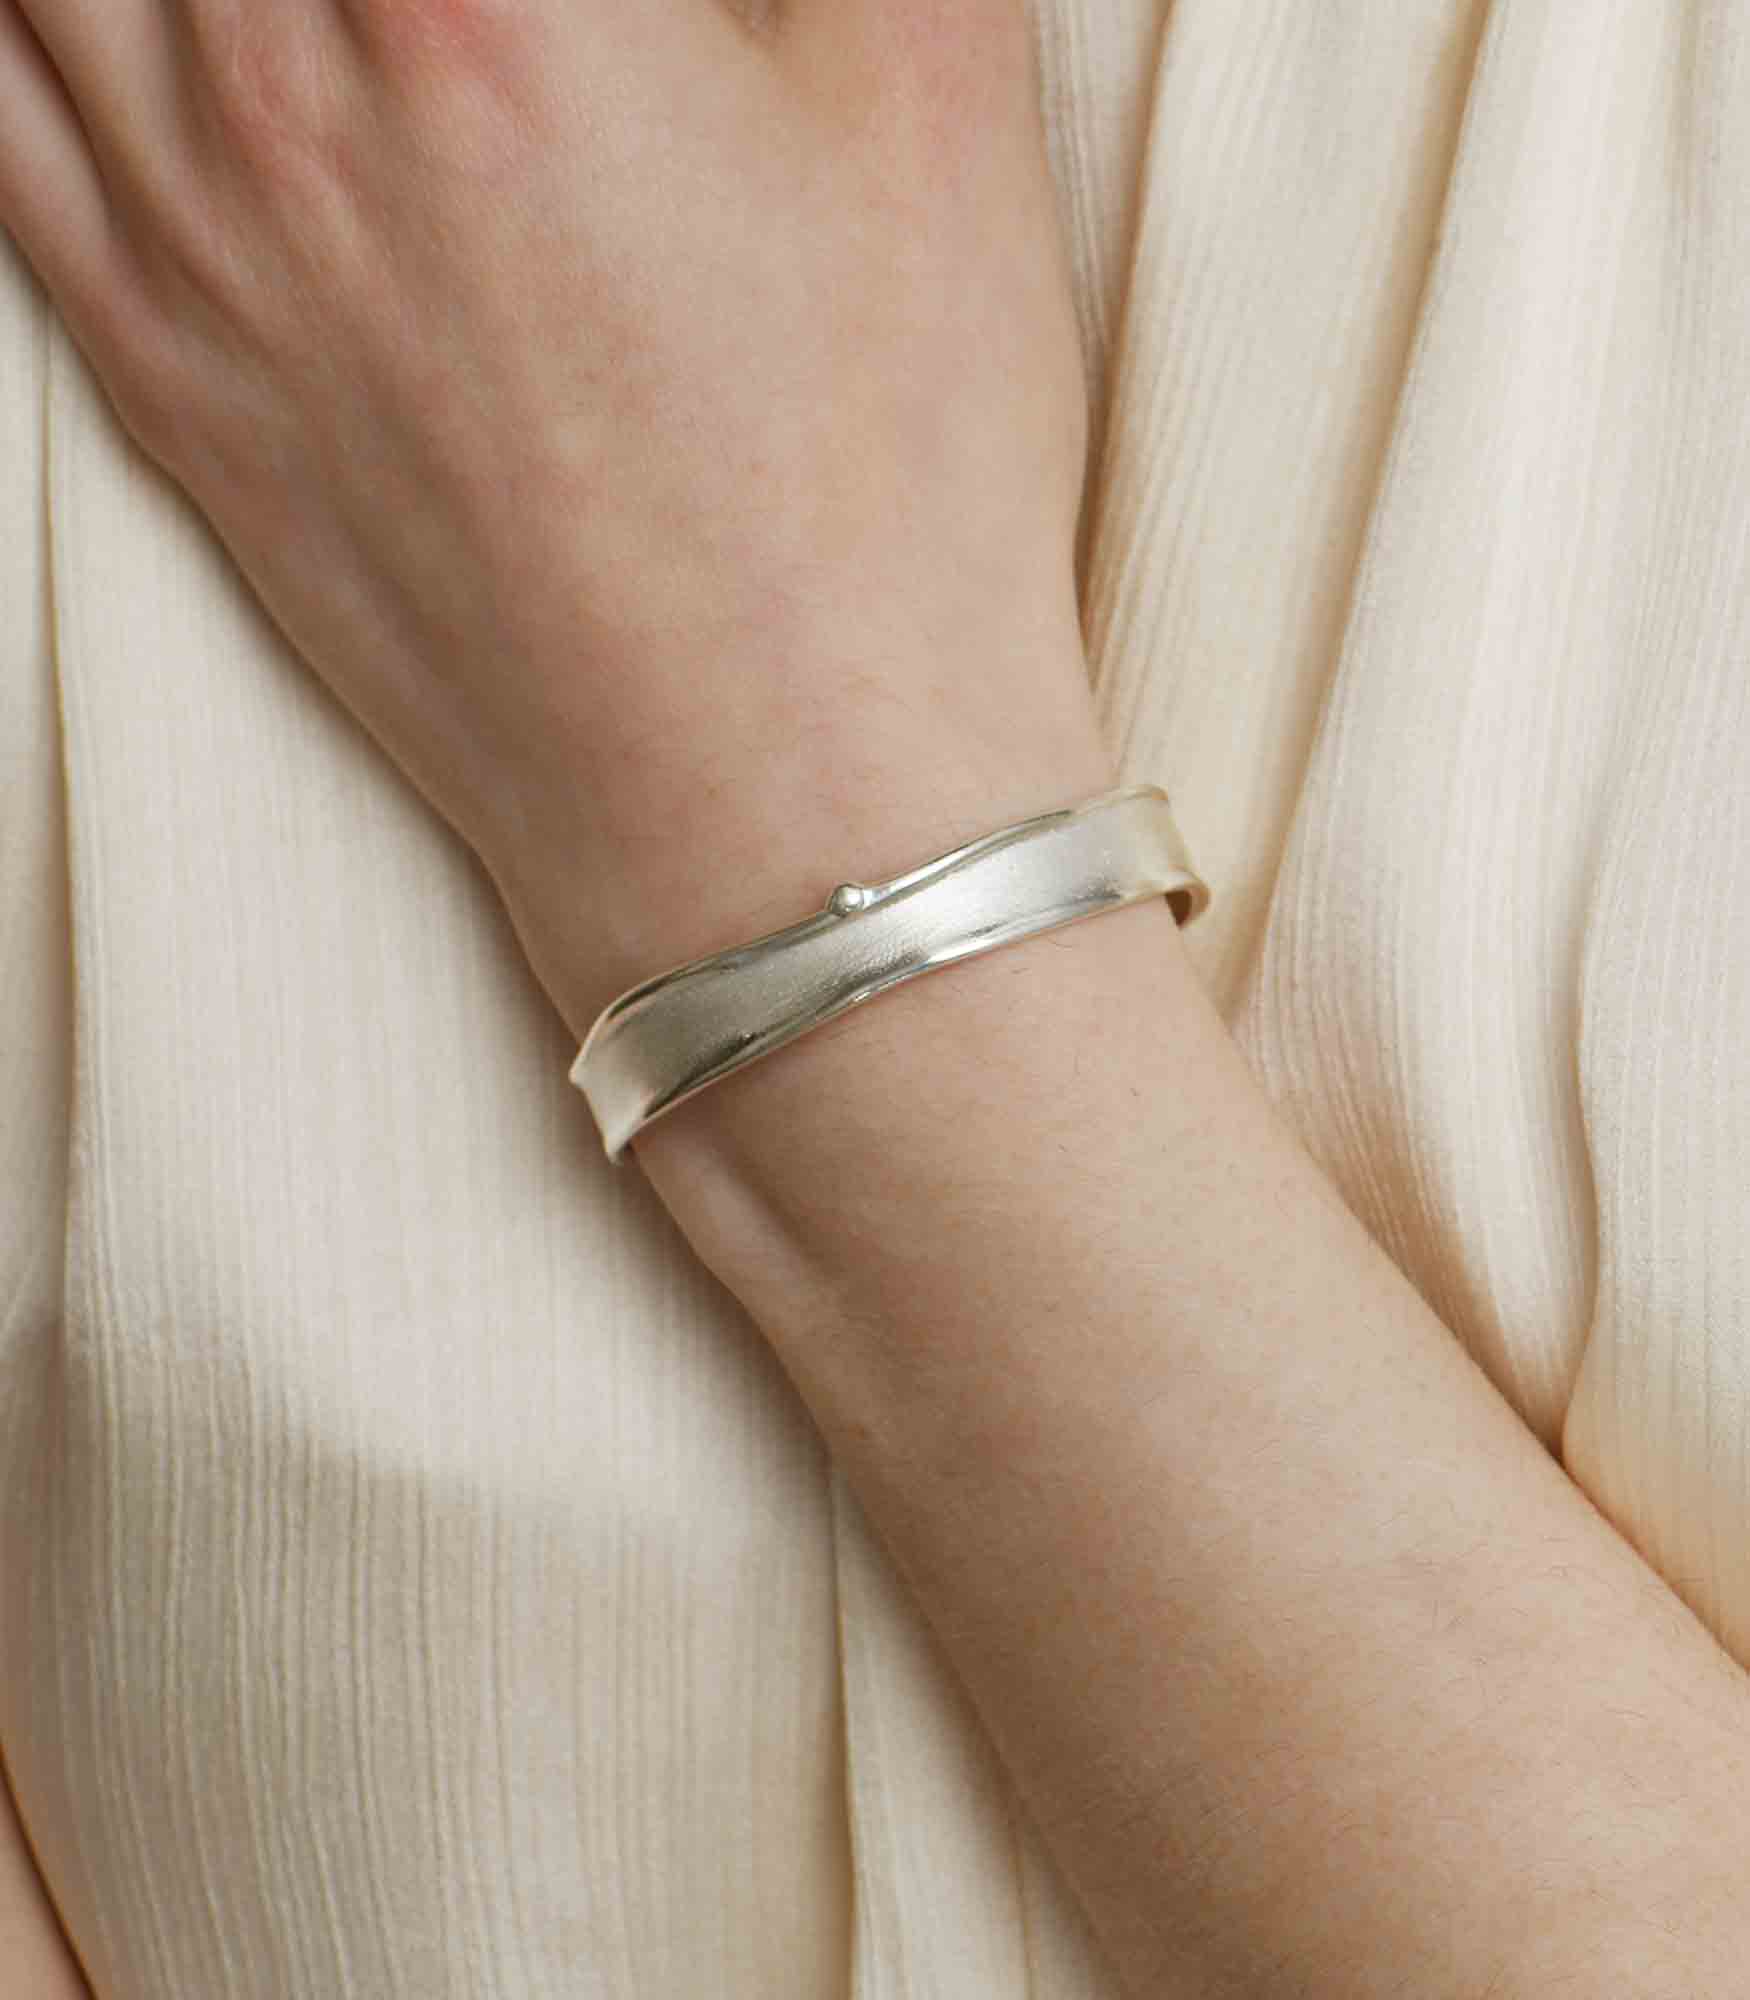 A sterling silver bangle bracelet which features a minimalistic design and a simple brushstroke texture.